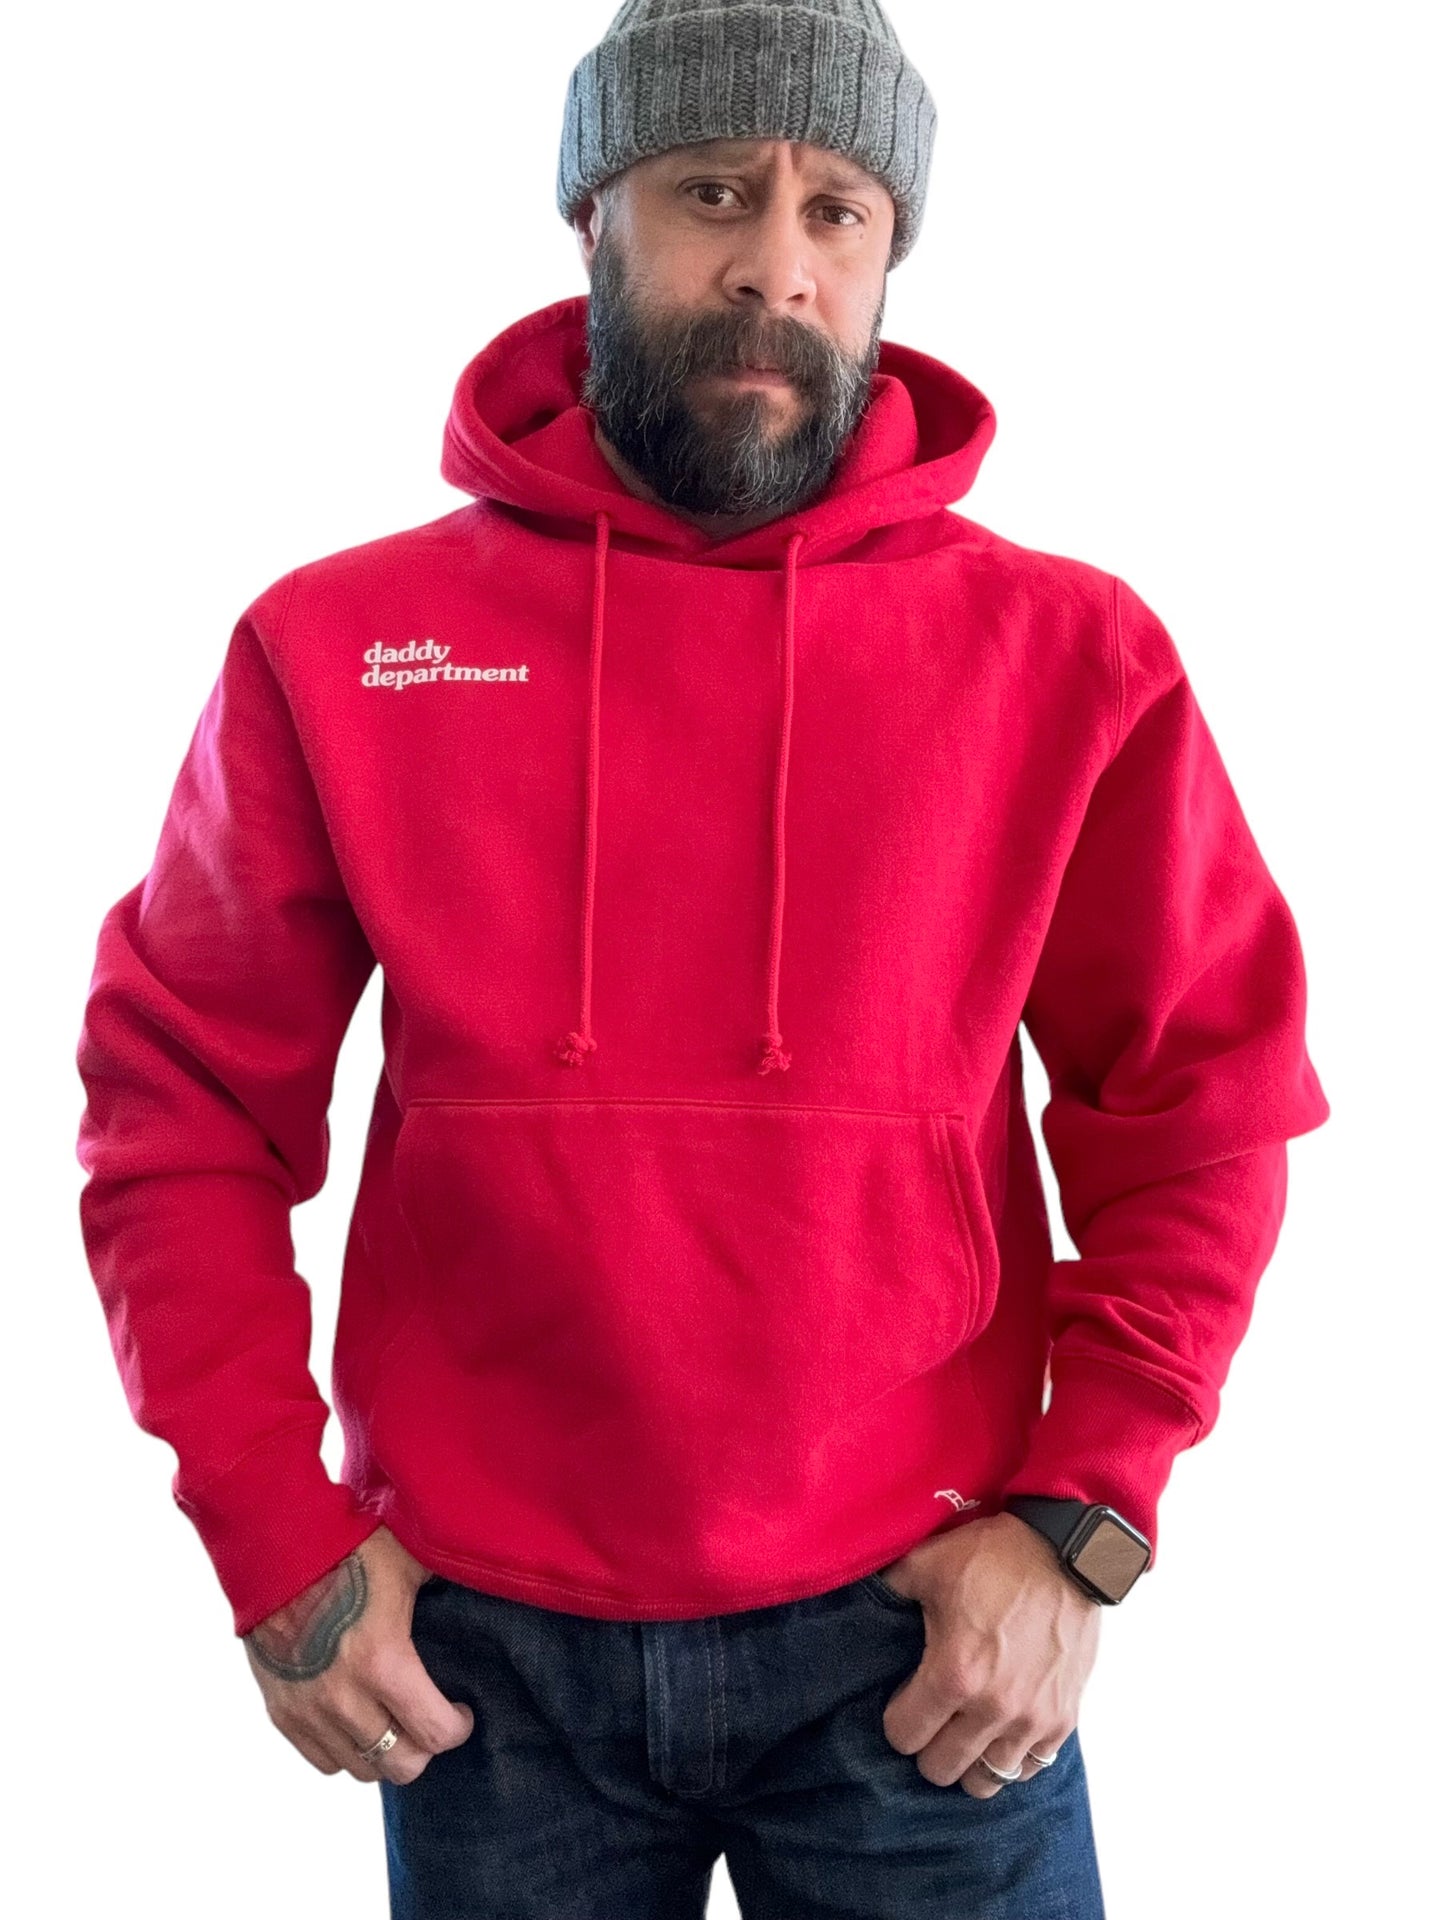 THE PREMIUM ULTRA COMFY RED HOODIE